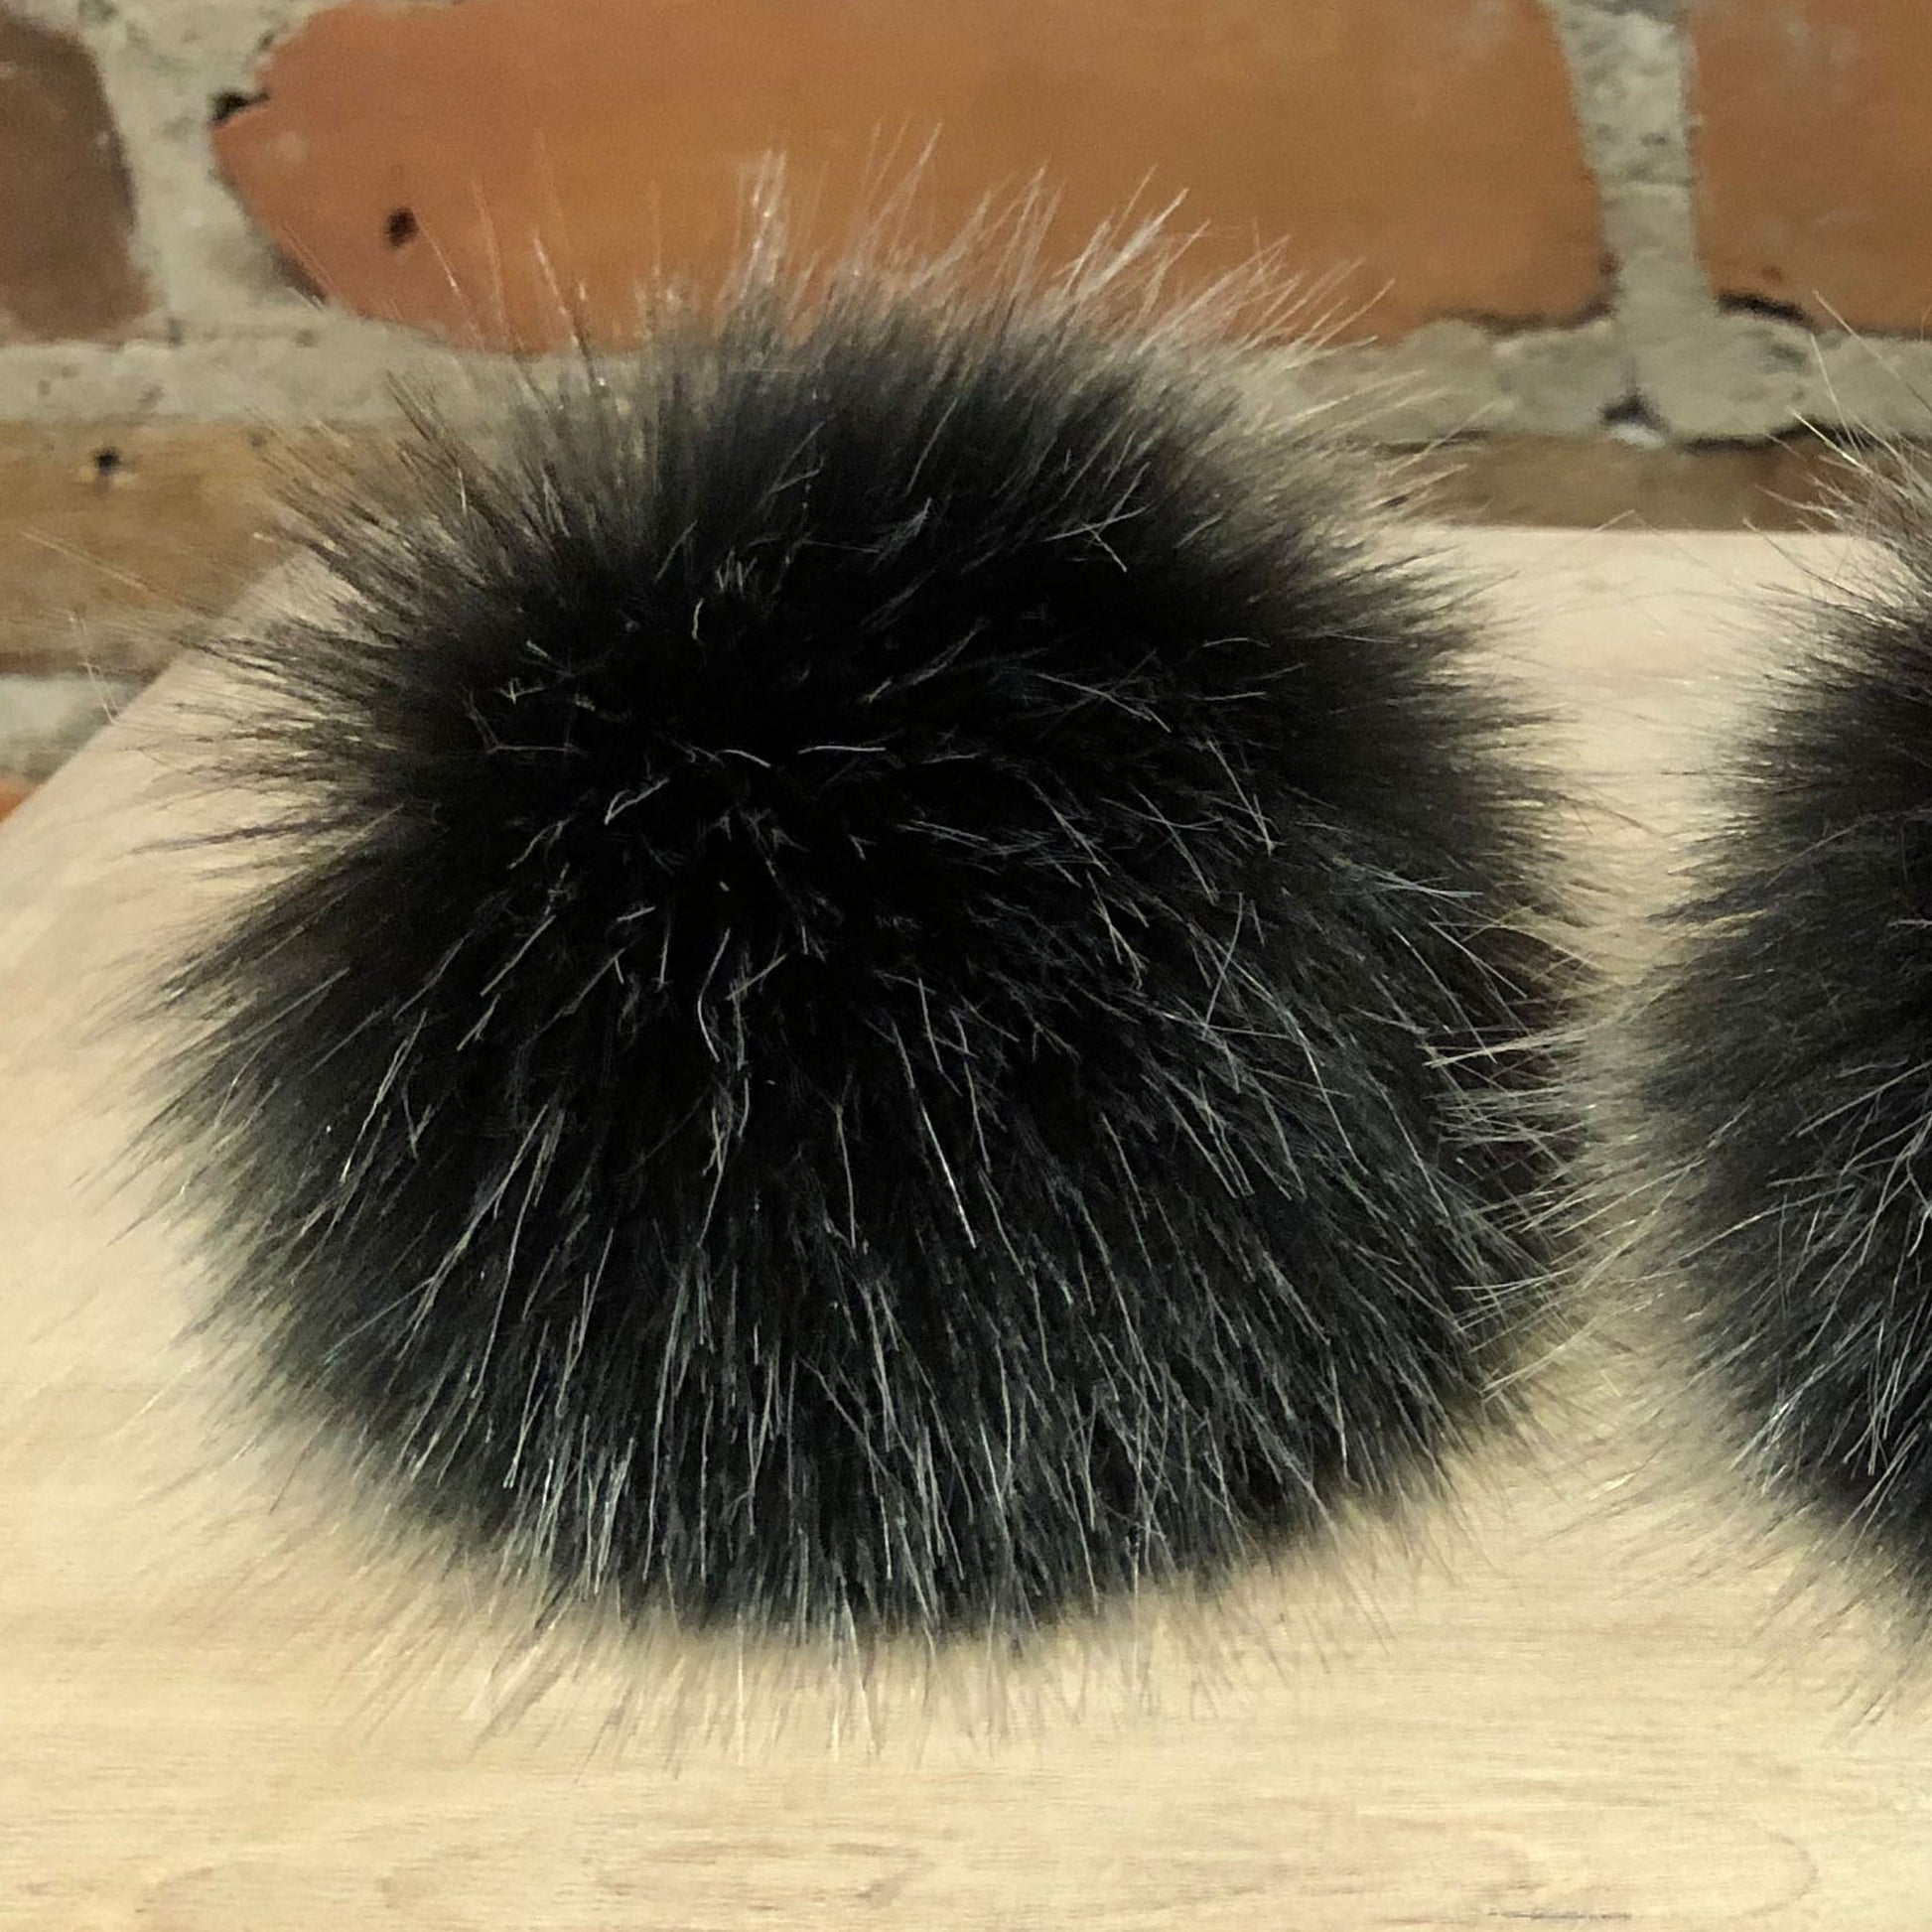 Black Faux Fur Pom Pom with Silver Tips for Knitting Projects